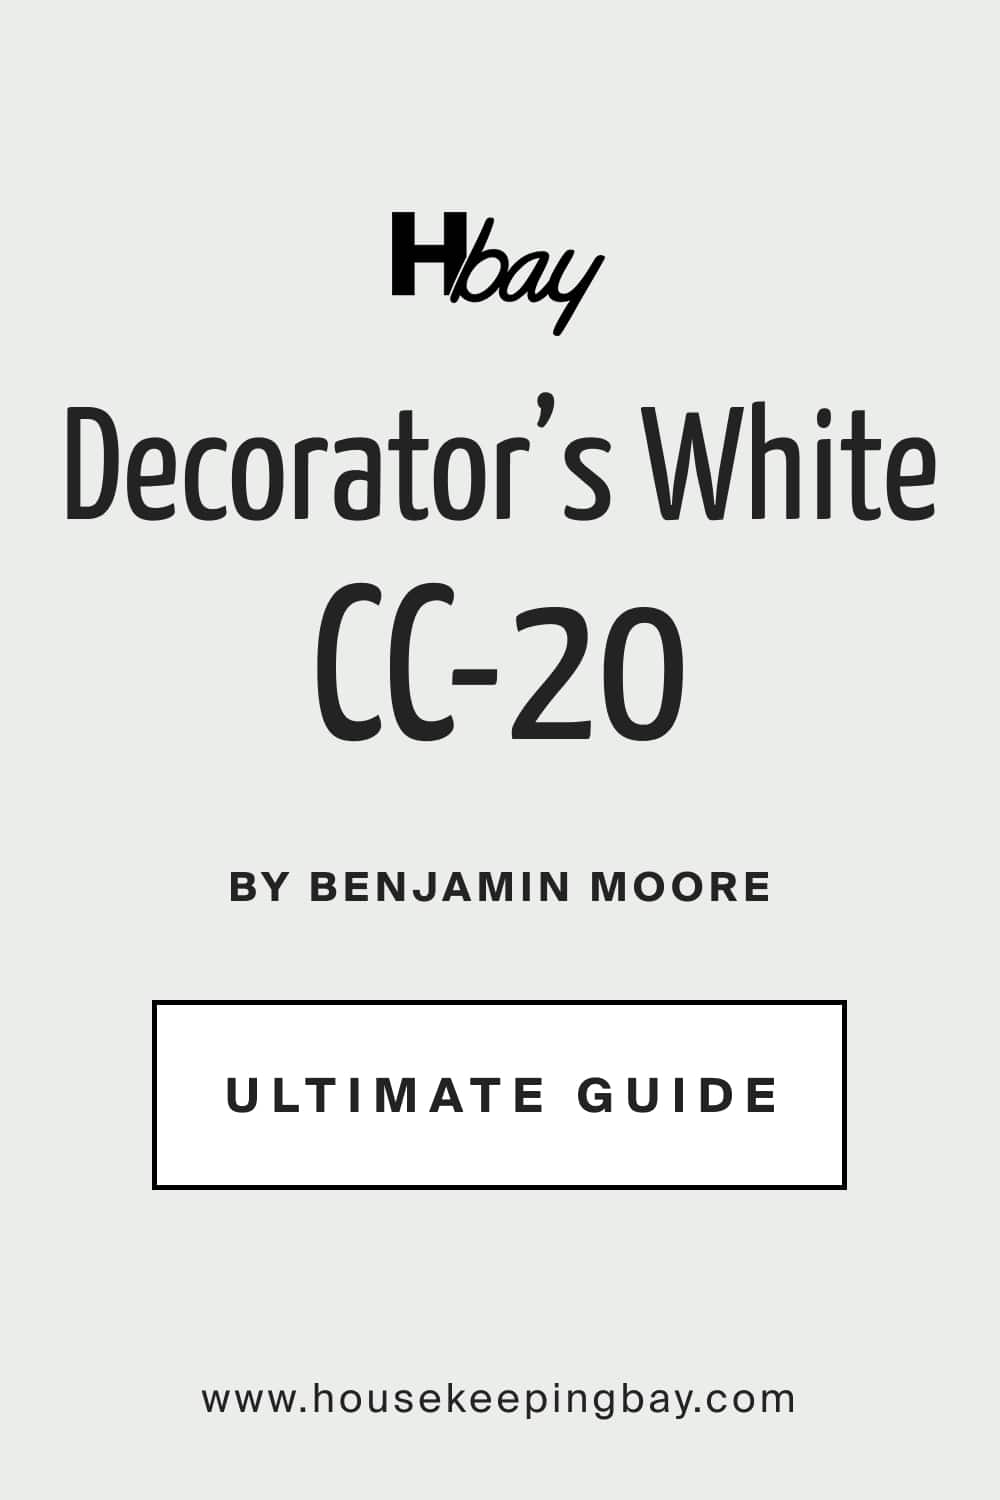 Decorator’s White CC 20 by Benjamin Moore Ultimate Guide